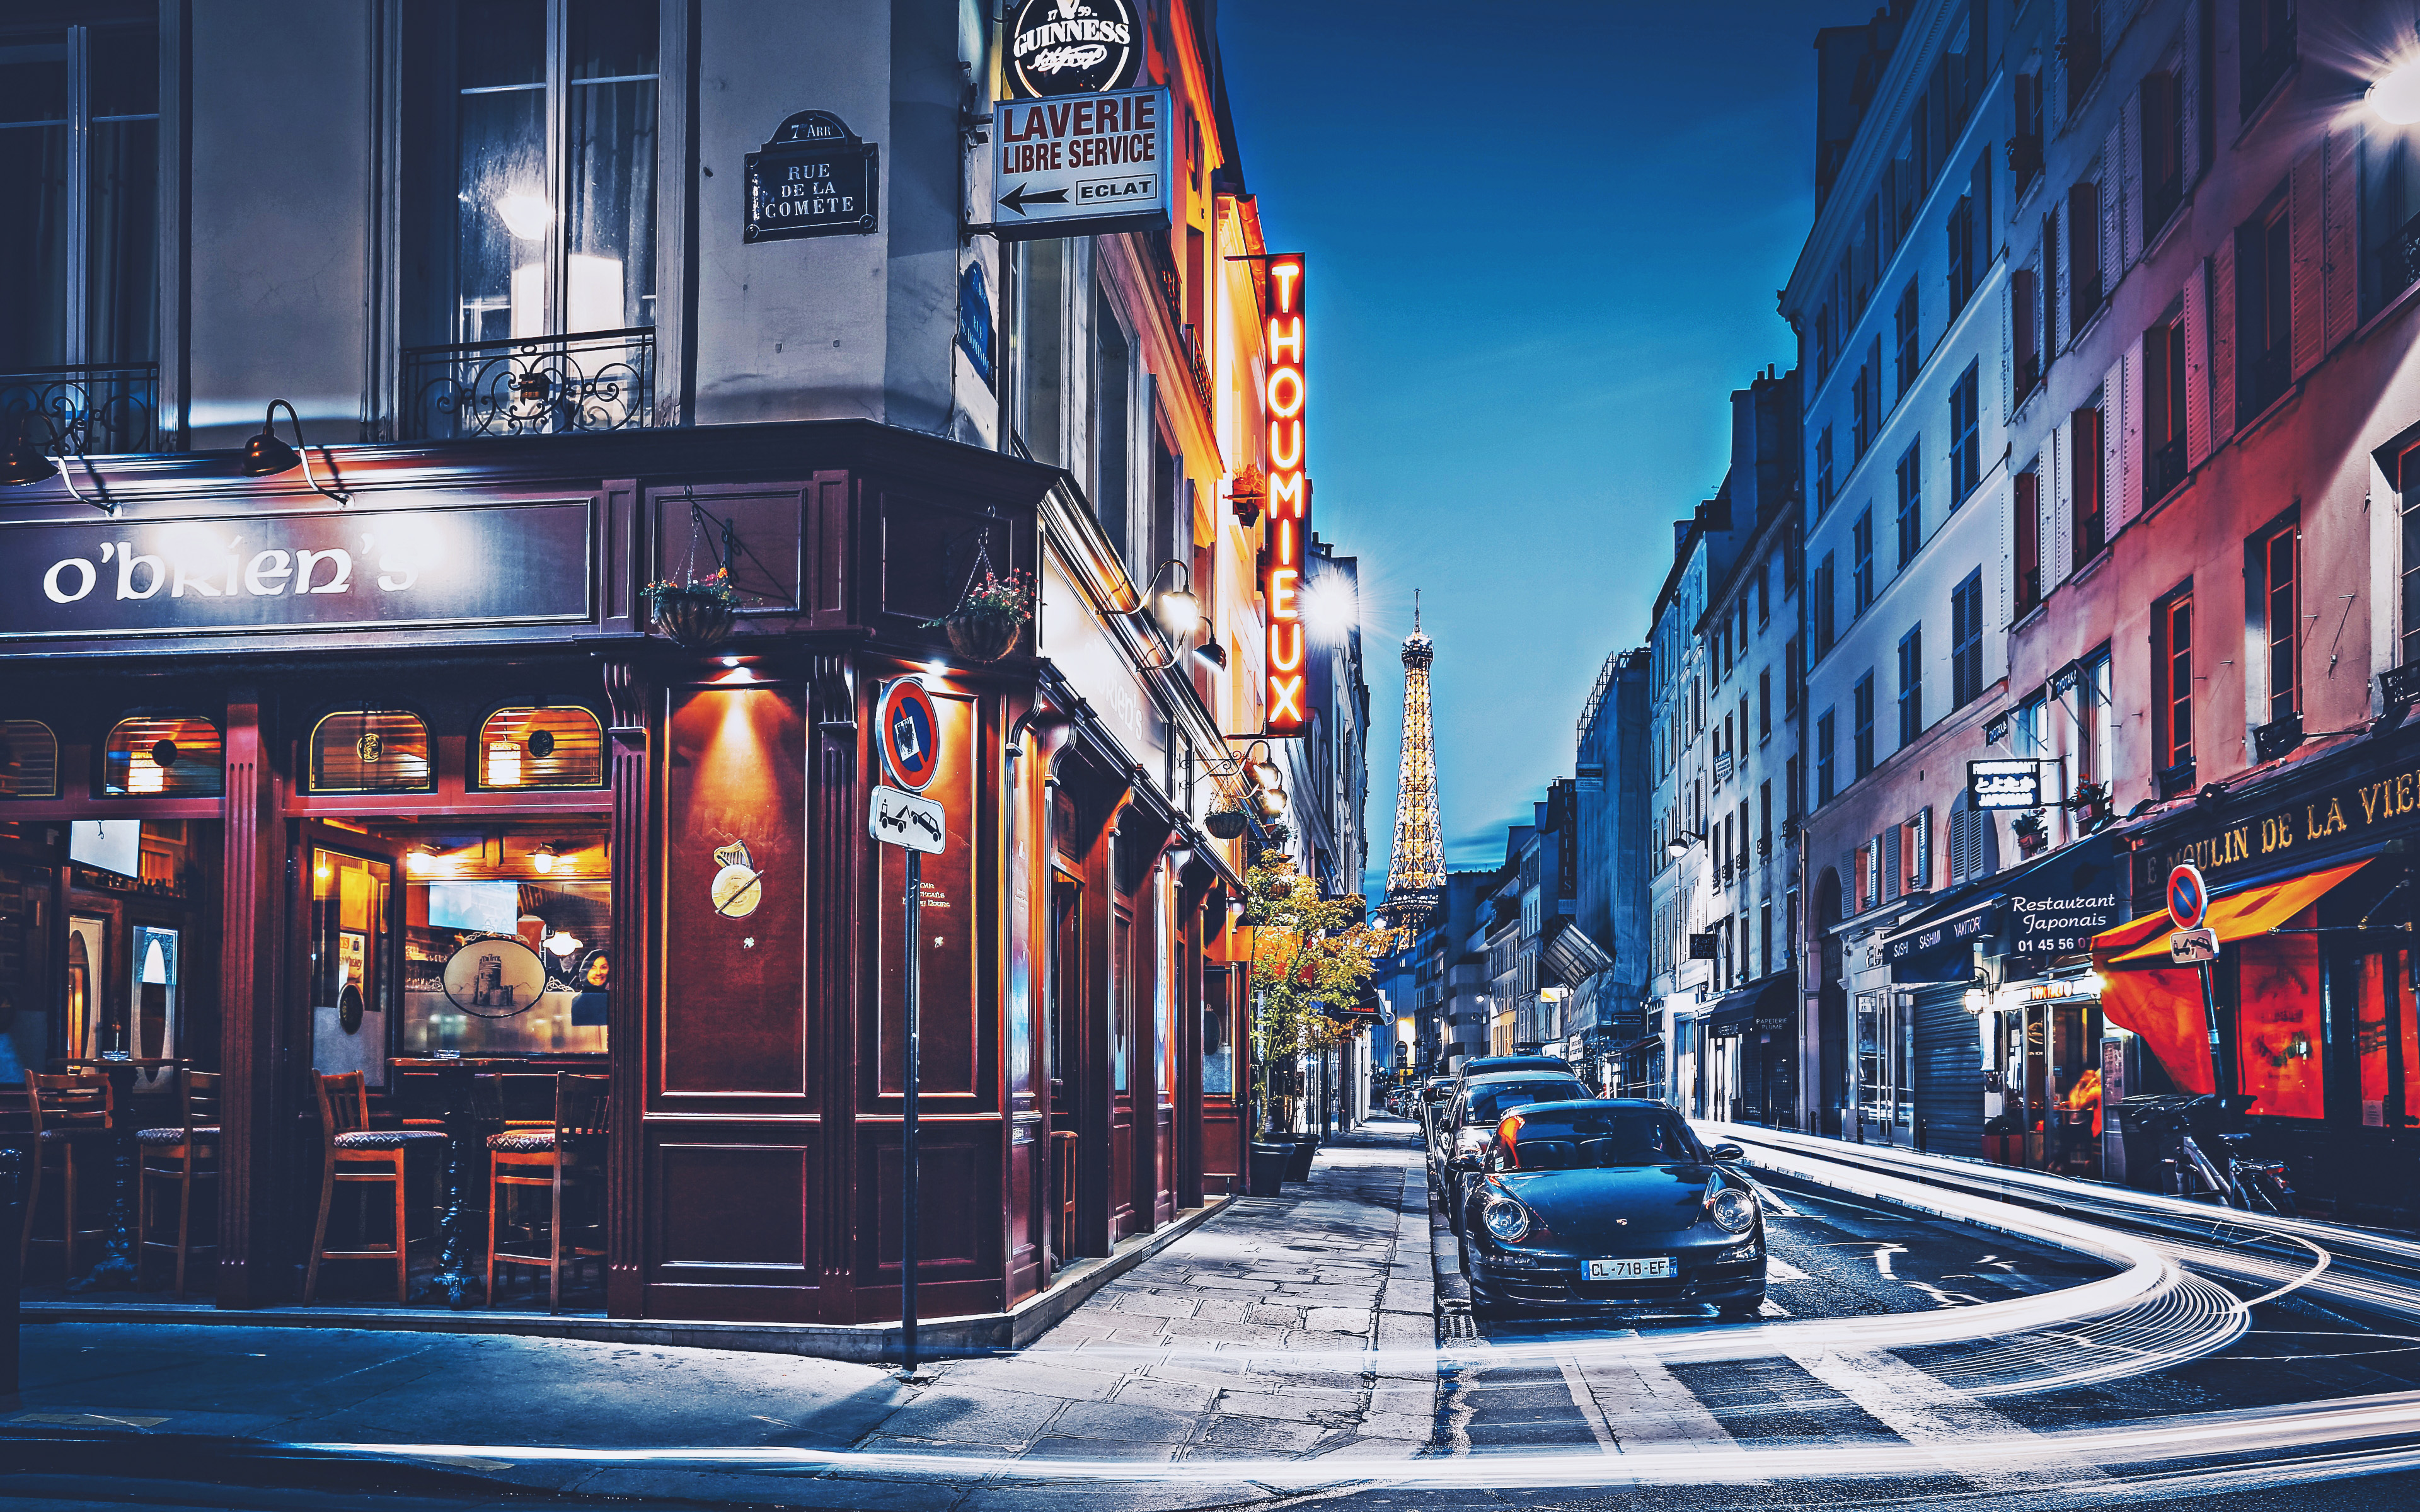 Download Wallpaper The Rue Saint Dominique, 4k, Eiffel Tower, Night Streets, French Cities, Paris, Europe For Desktop With Resolution 3840x2400. High Quality HD Picture Wallpaper